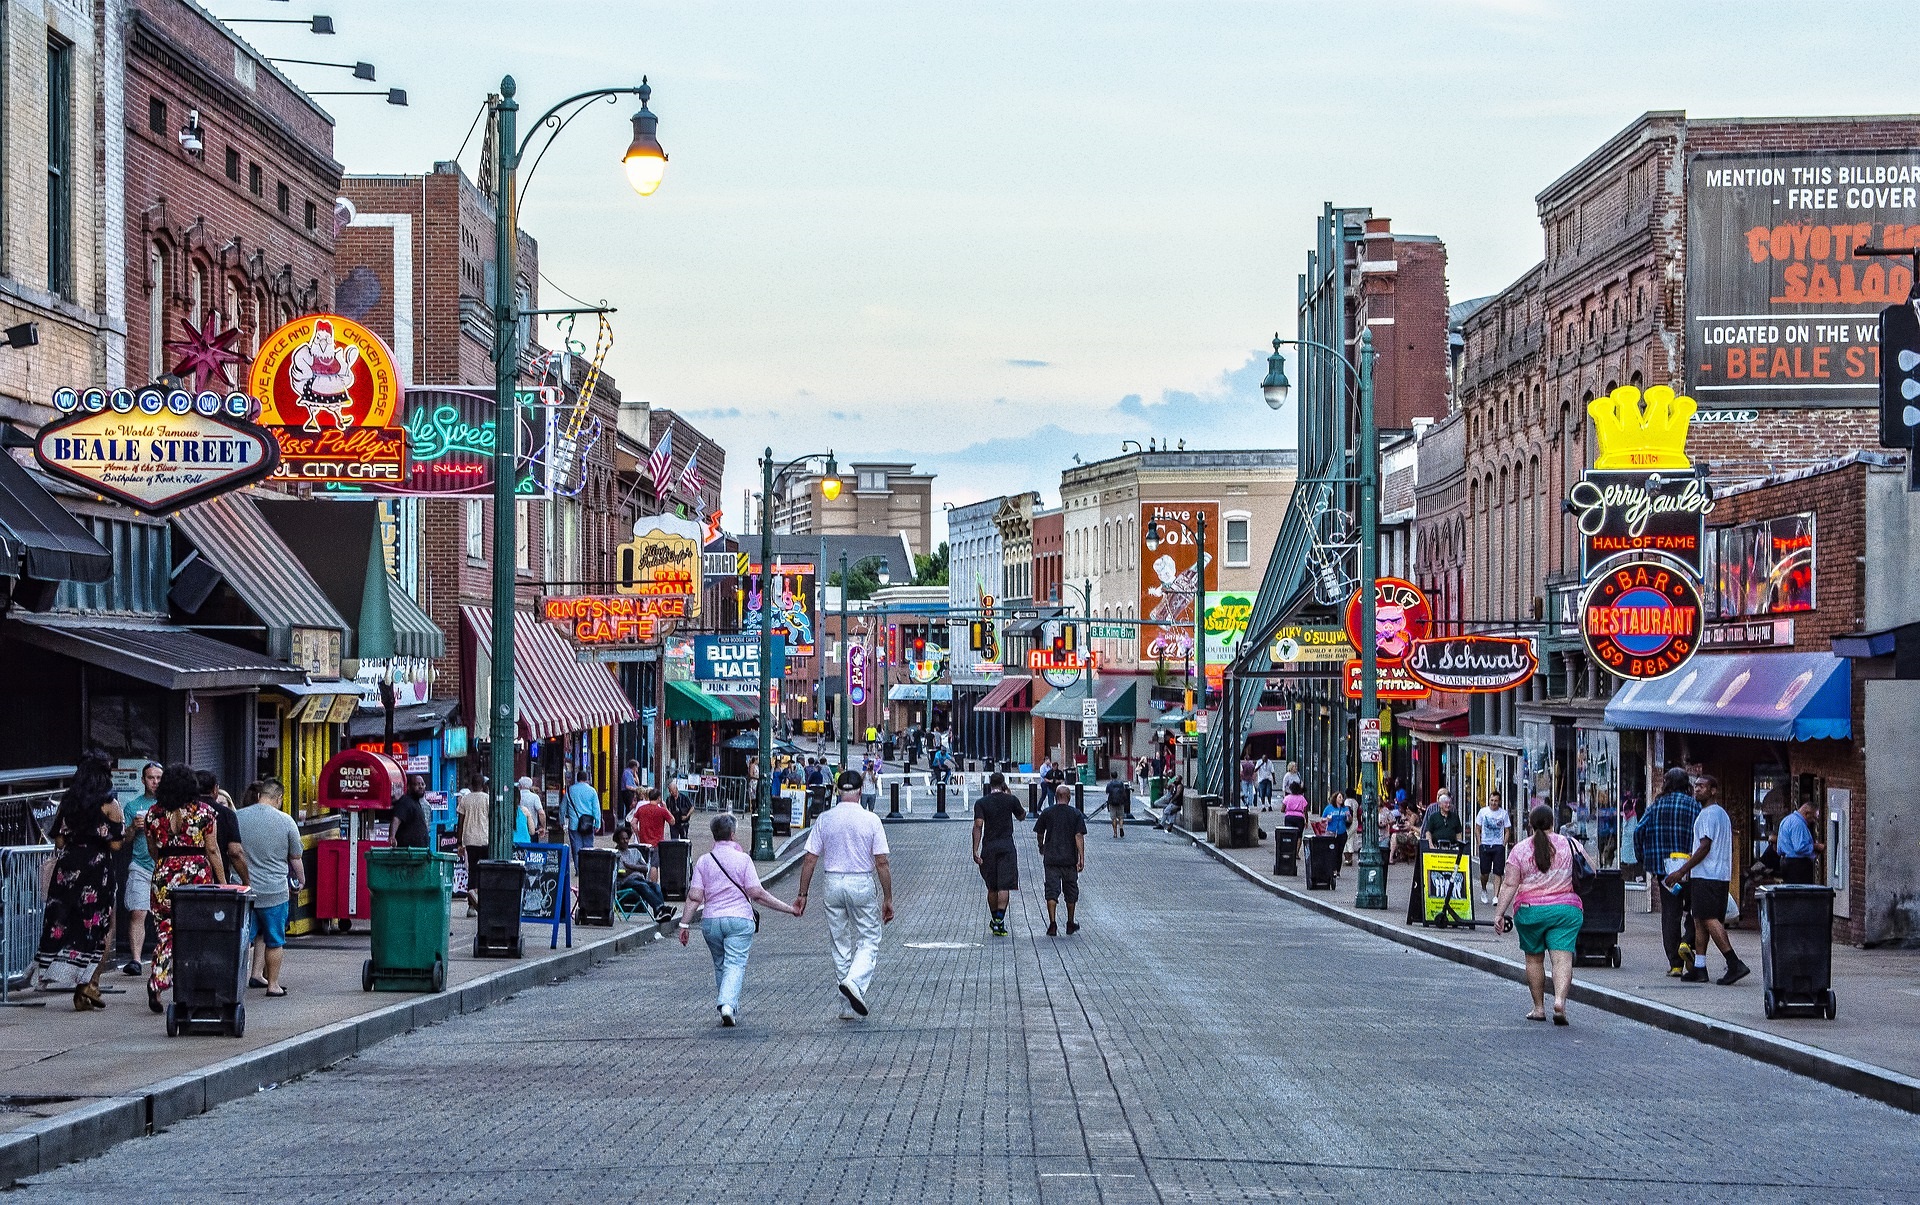 Beale street in Memphis, Tennessee